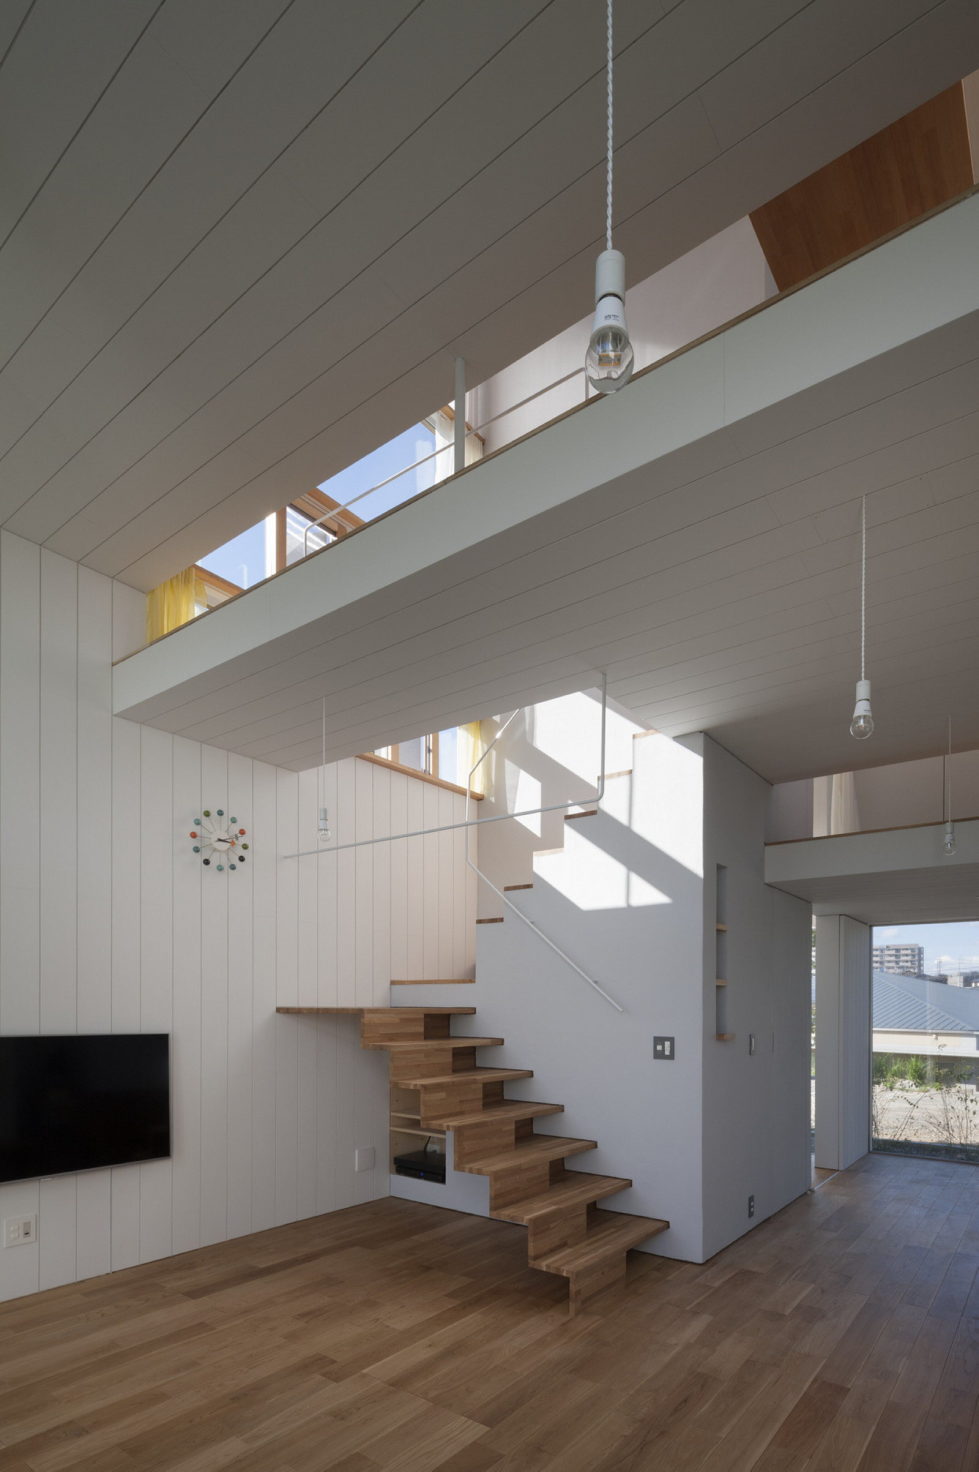 The family idyll in Japan from the Ihrmk studio 2